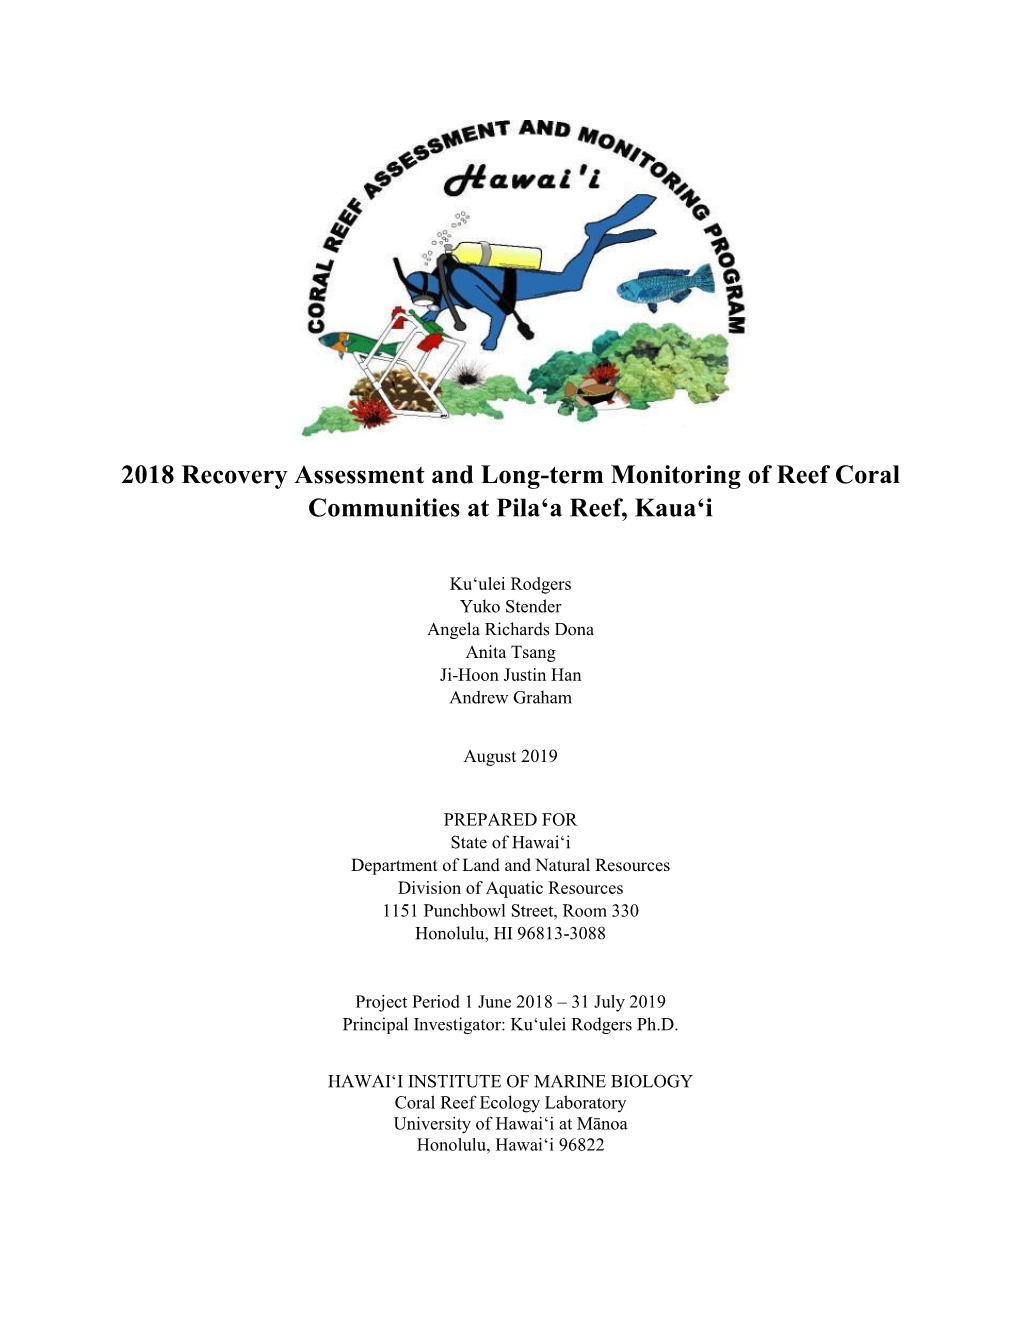 2018 Recovery Assessment and Long-Term Monitoring of Reef Coral Communities at Pilaʻa Reef, Kauaʻi